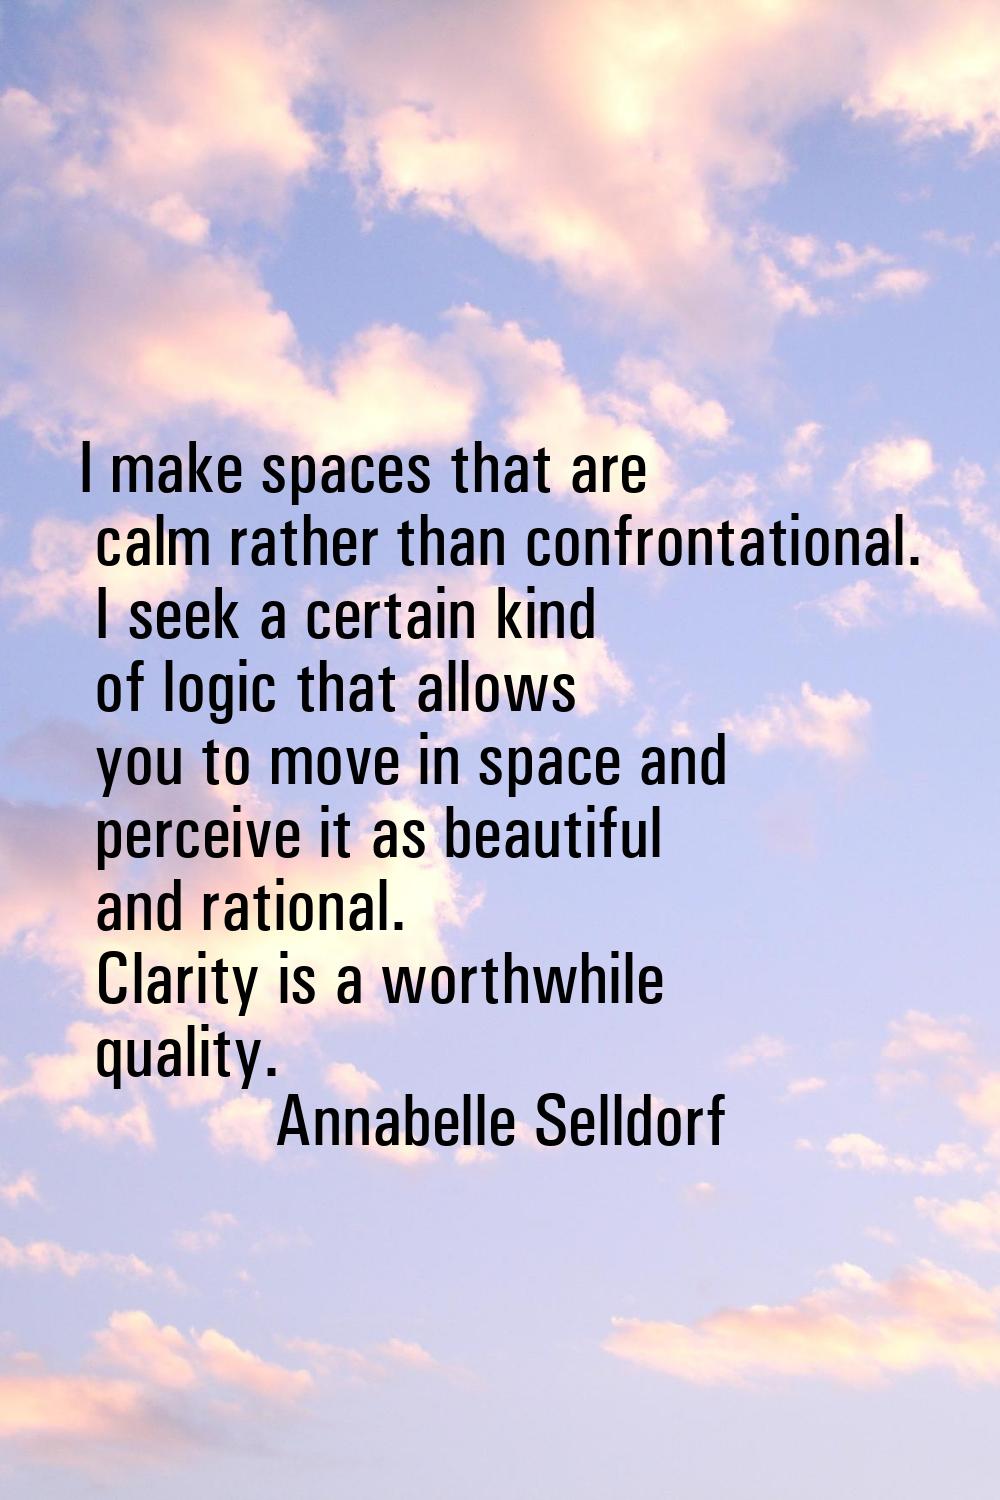 I make spaces that are calm rather than confrontational. I seek a certain kind of logic that allows